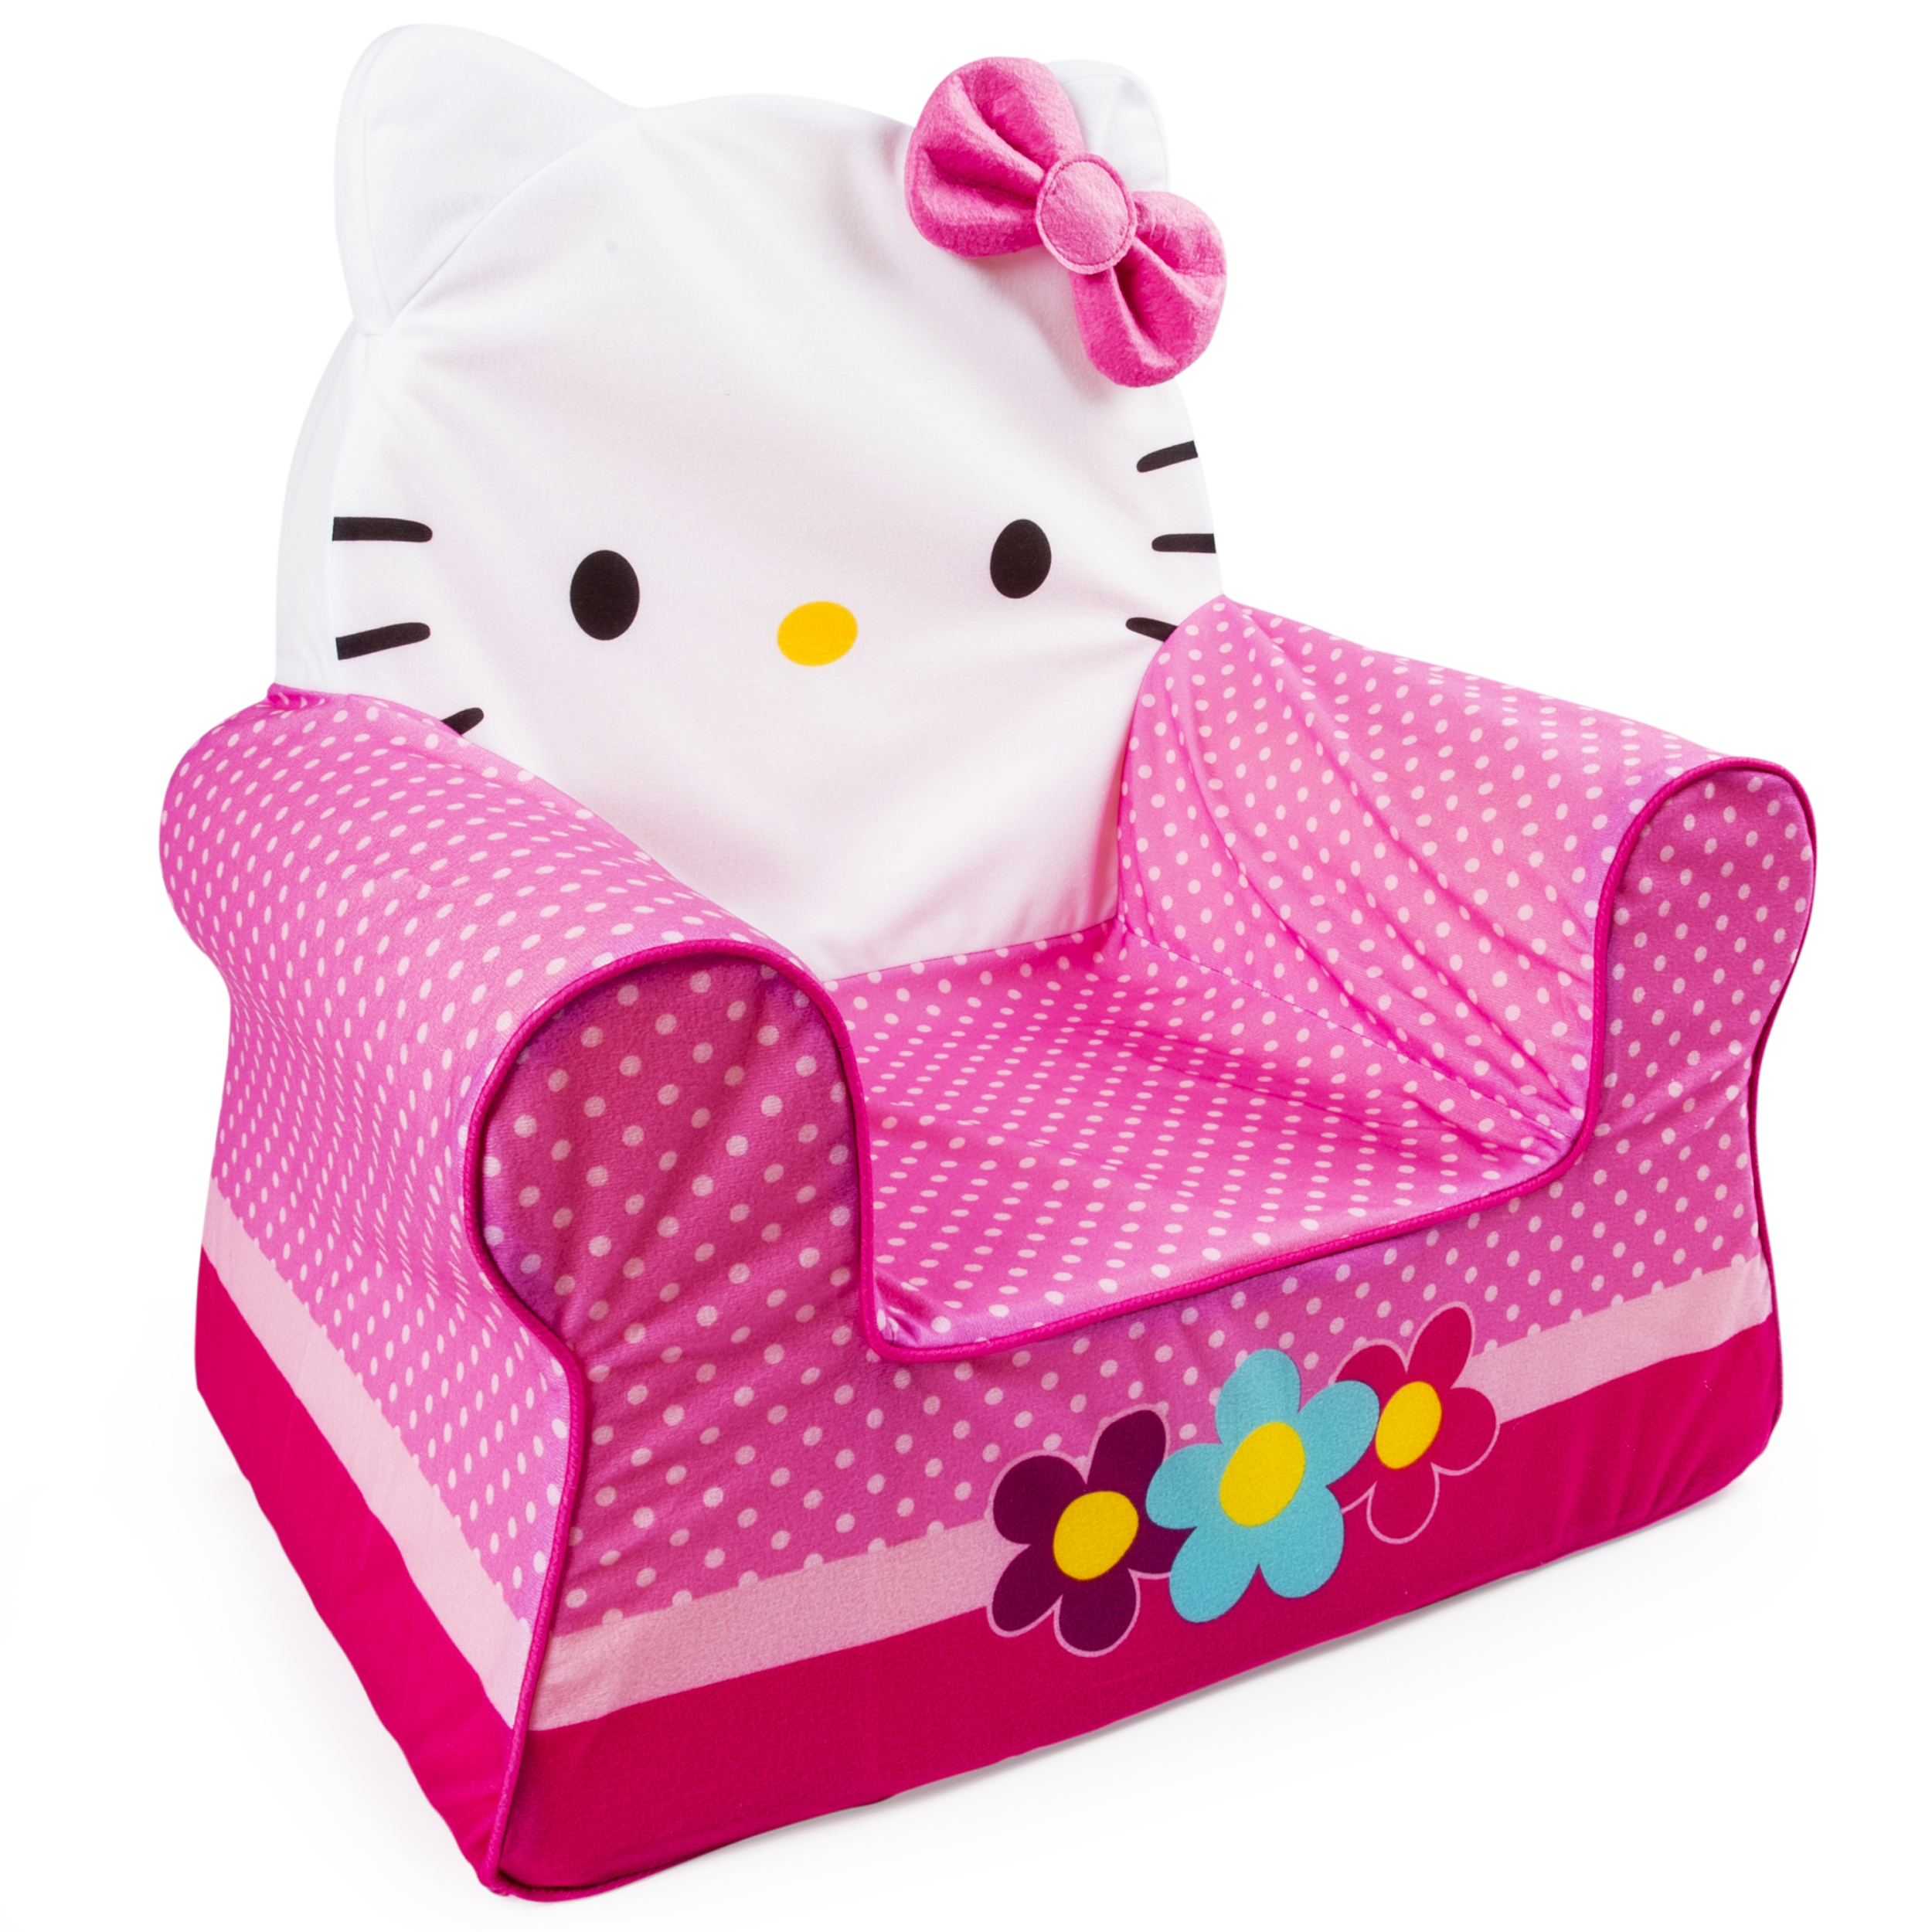 Marshmallow Furniture, Children's Foam Comfy Chair, Hello Kitty, by Spin Master - image 2 of 2